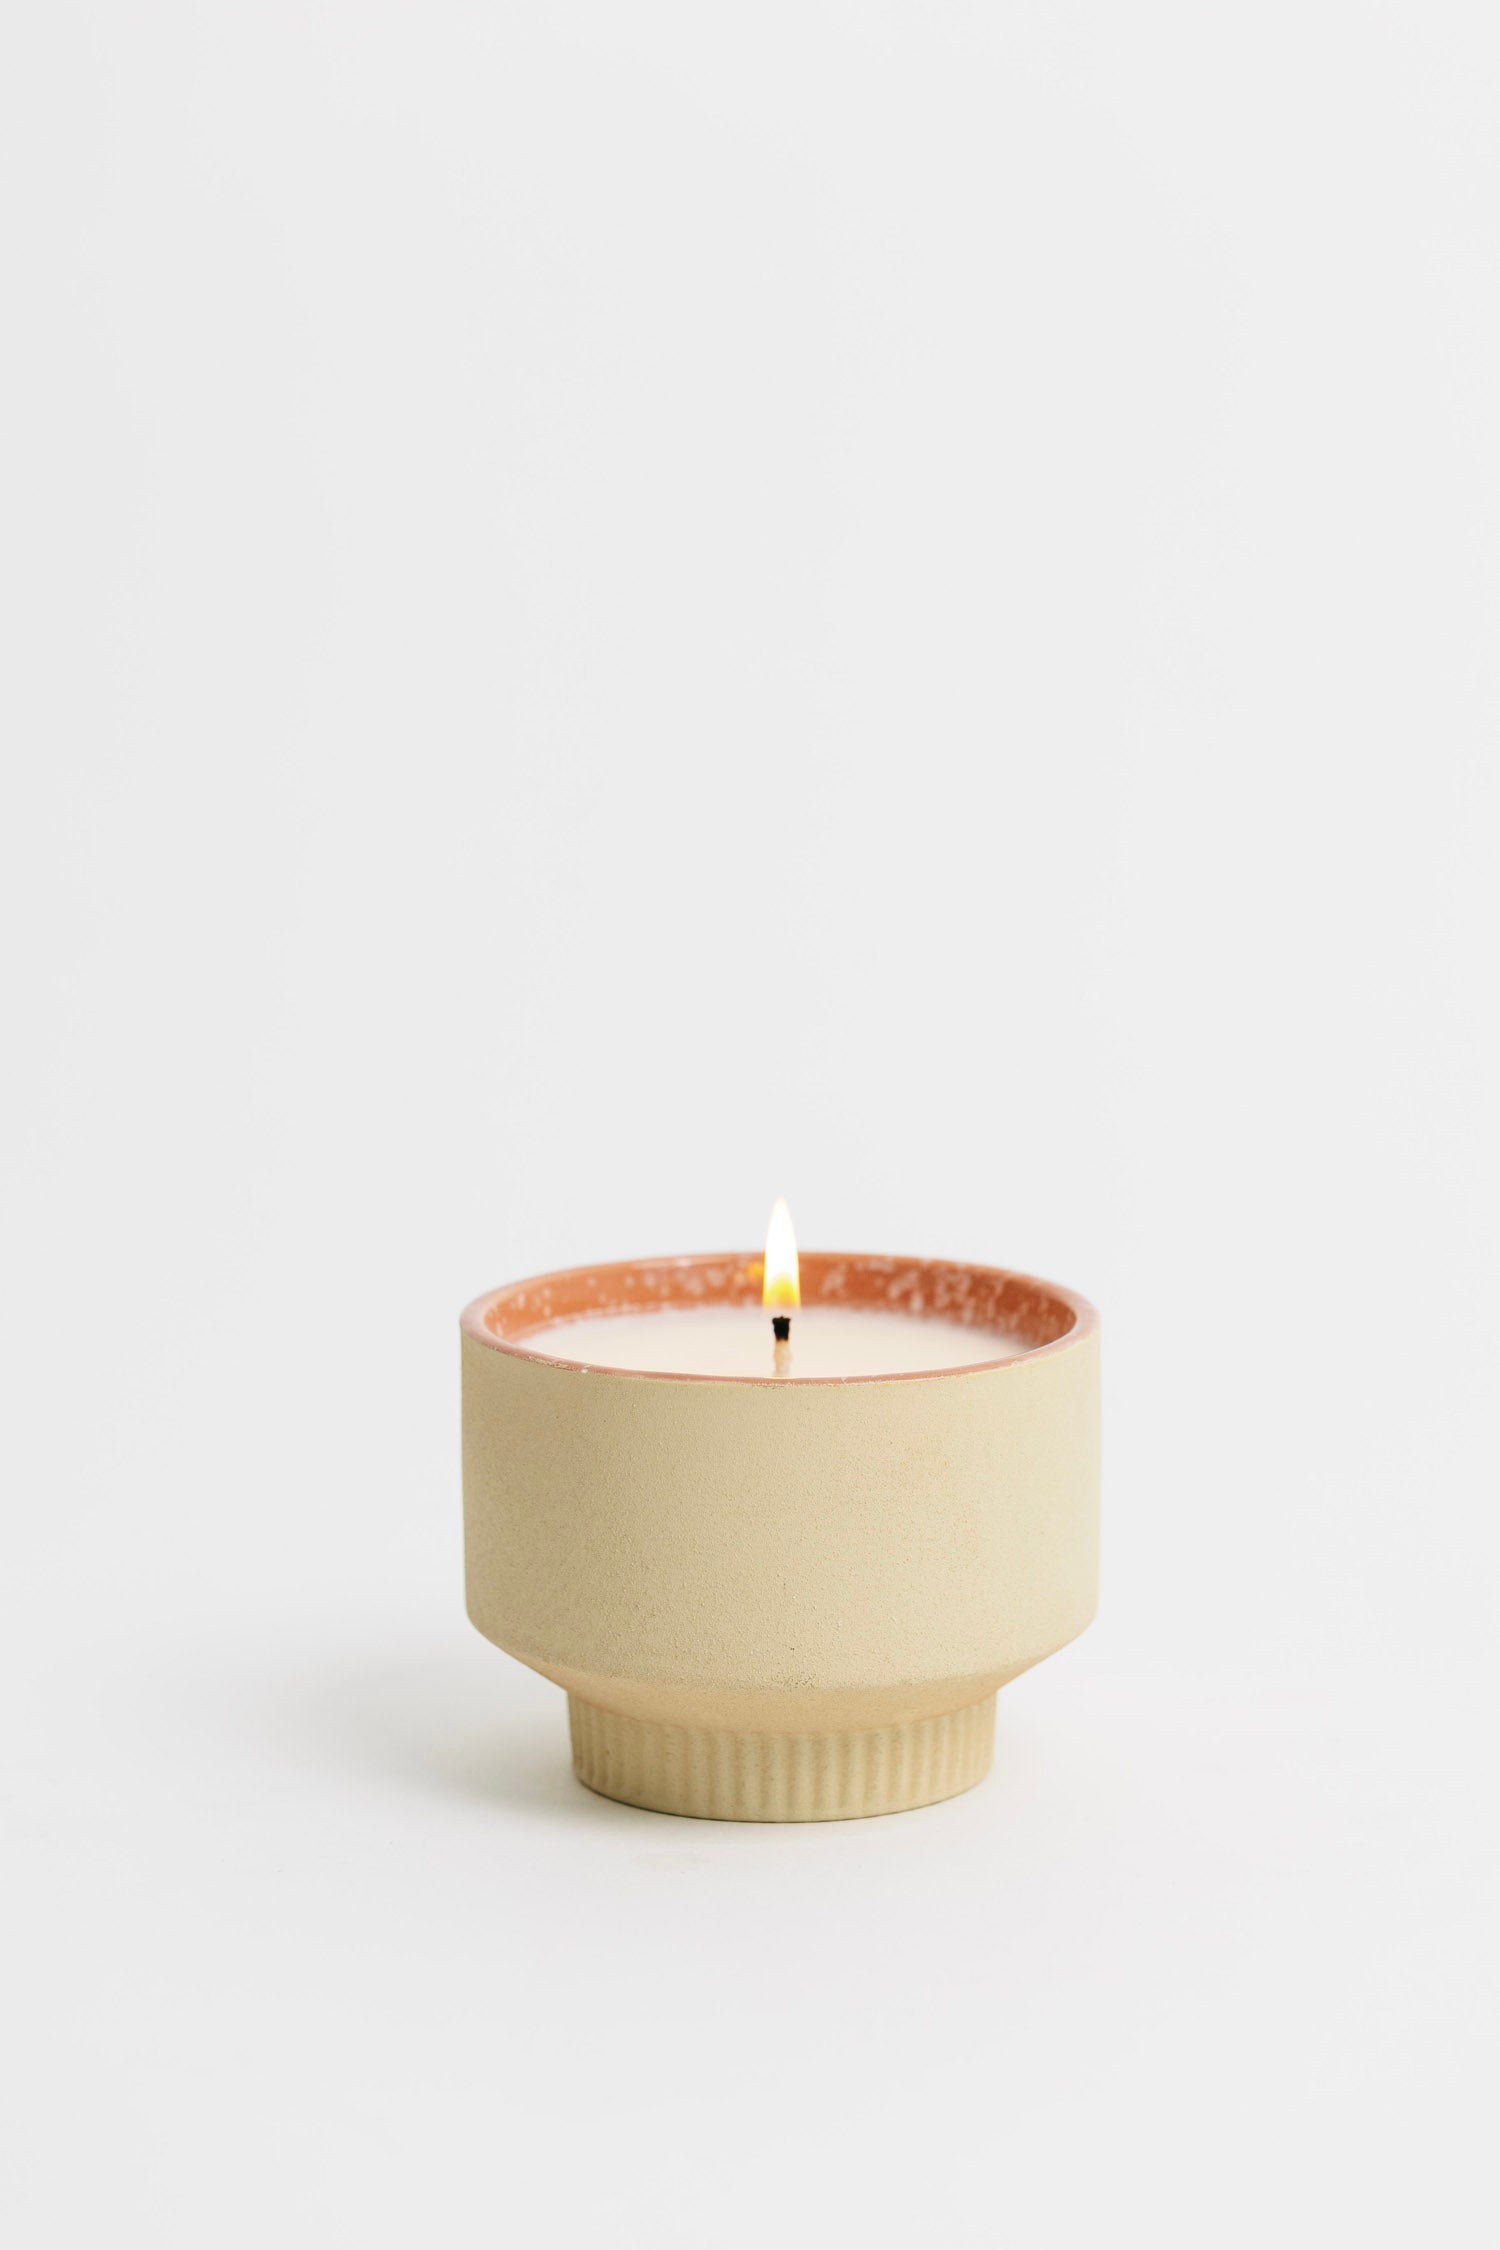 Chasing Summer Candle